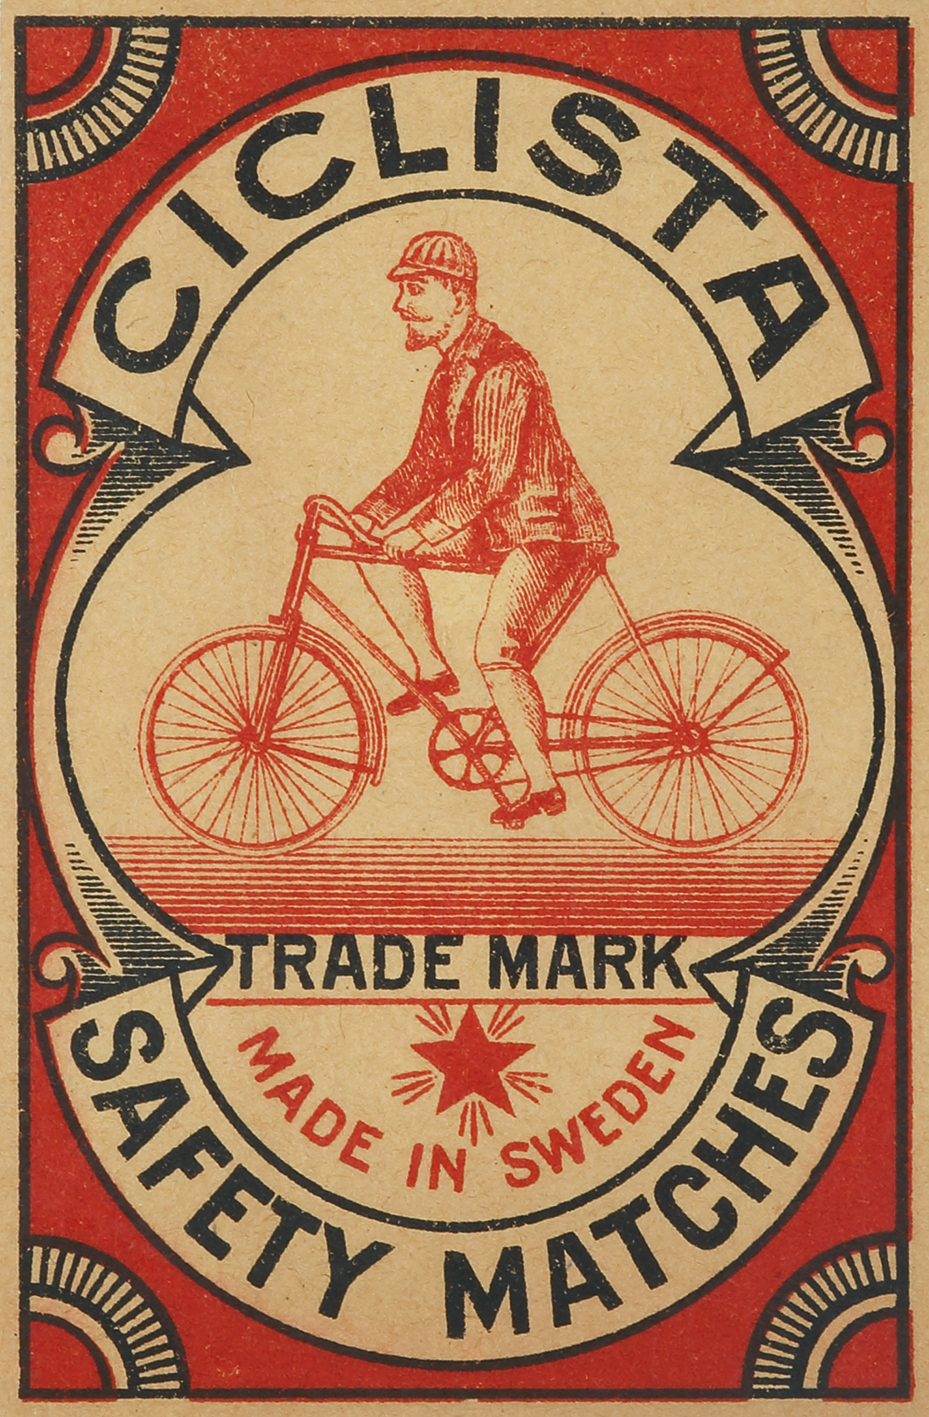 Ciclista [Cycling] - Antique Print from 1910